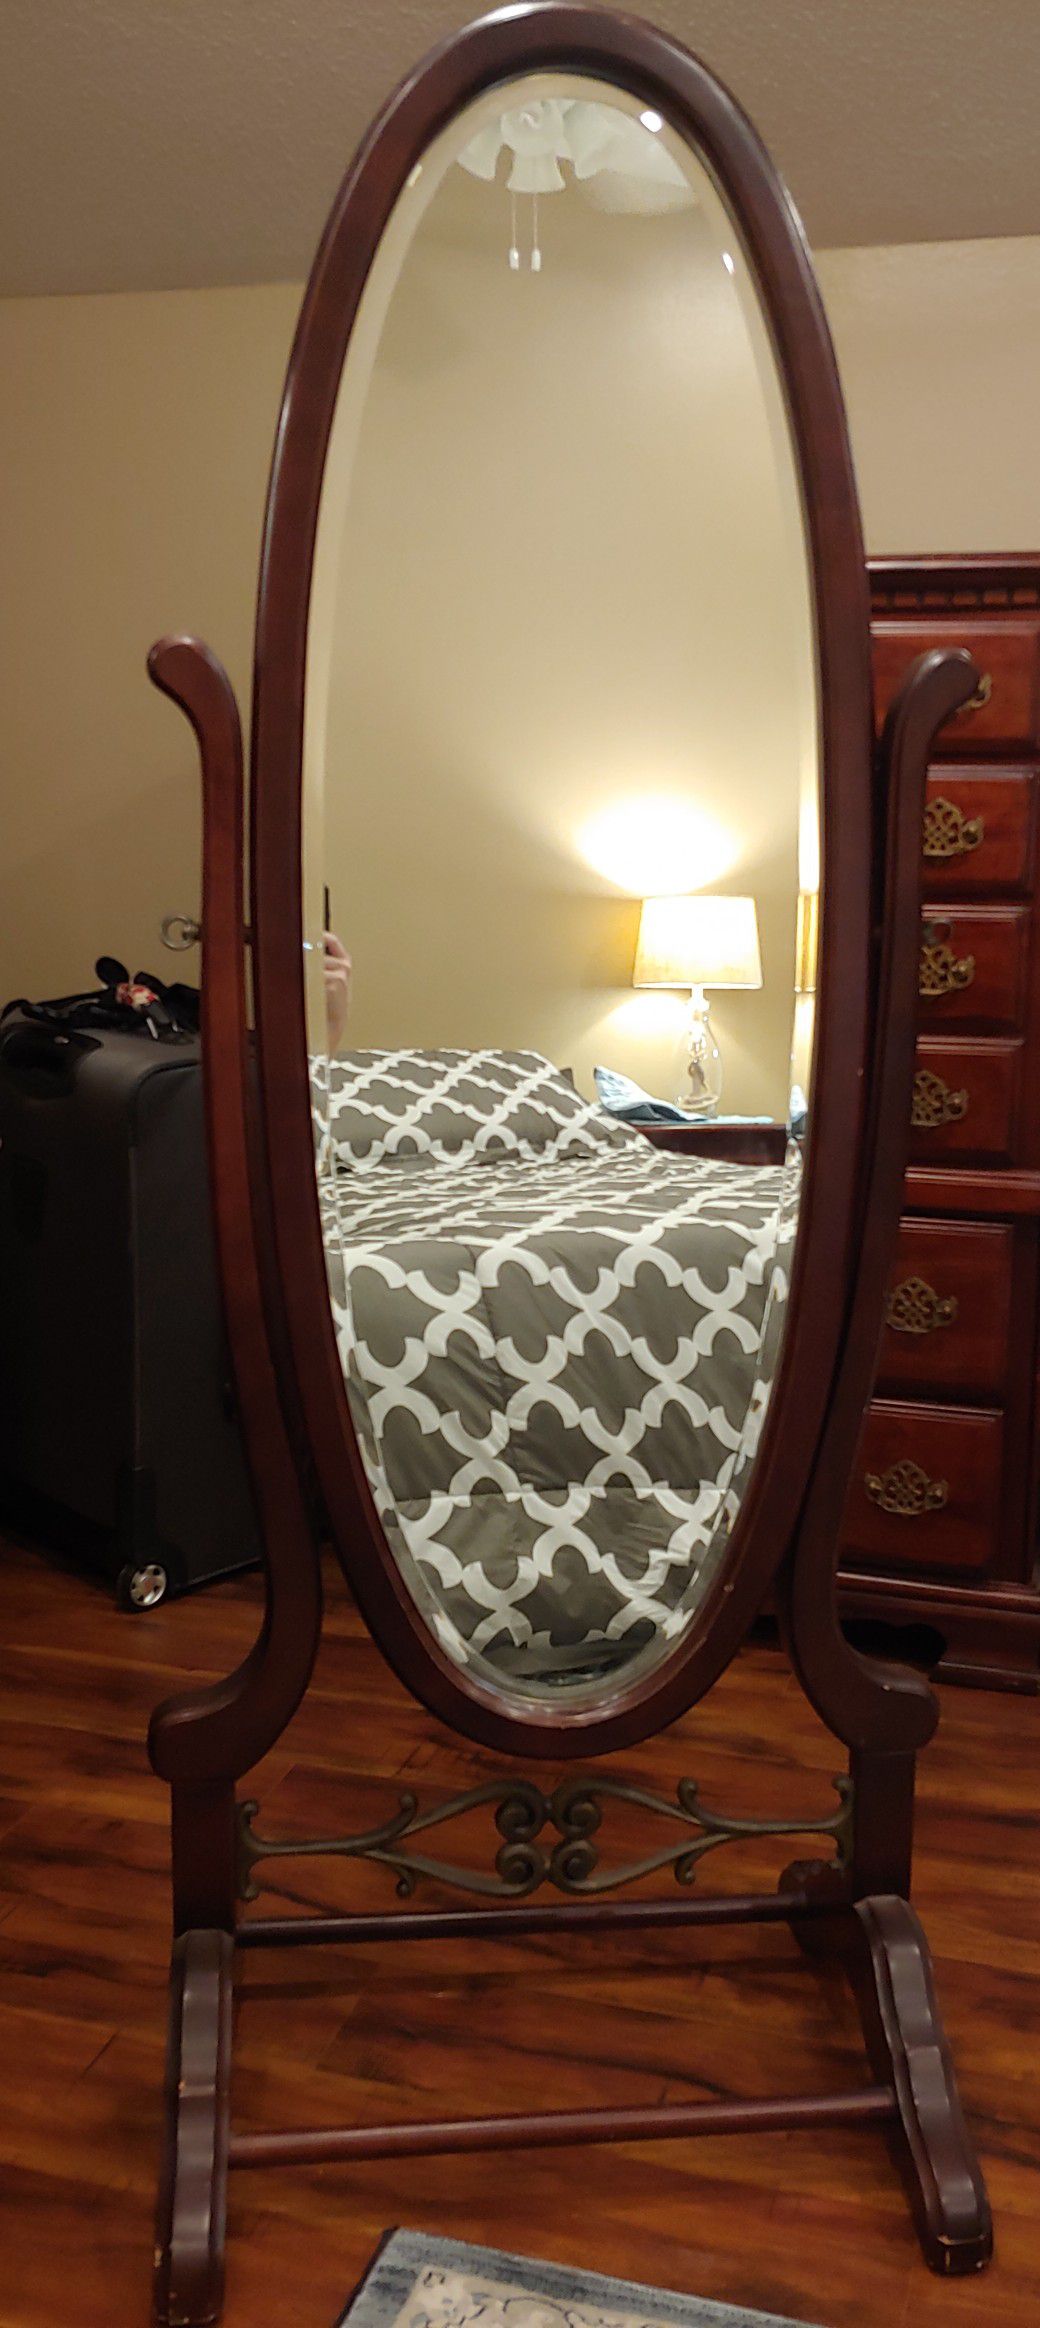 Old Fashioned Stand-Up Full Length Wooden Mirror